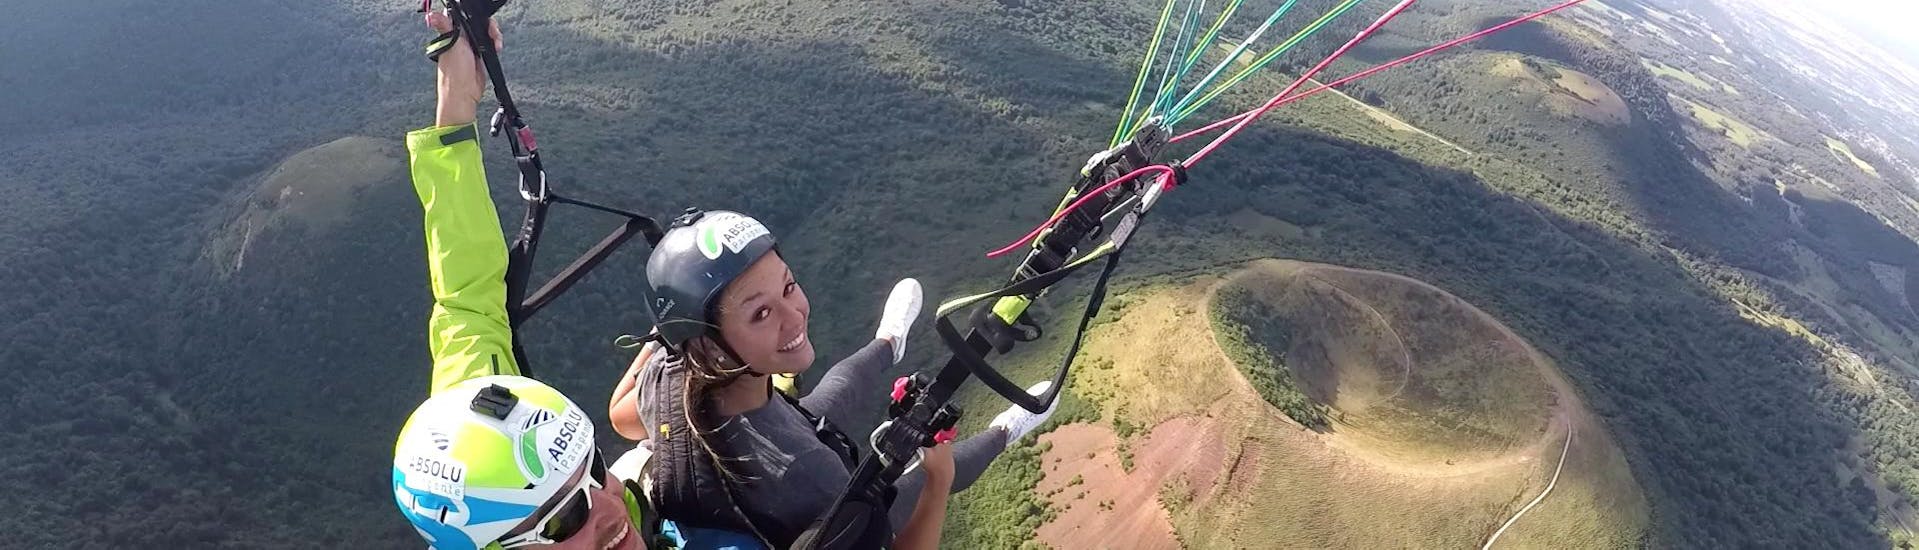 During the Tandem Paragliding "Performance" - Puy de Dôme, a woman is over the moon whilst flying safely over magnificent landscape with a qualified pilot from Absolu Parapente. 